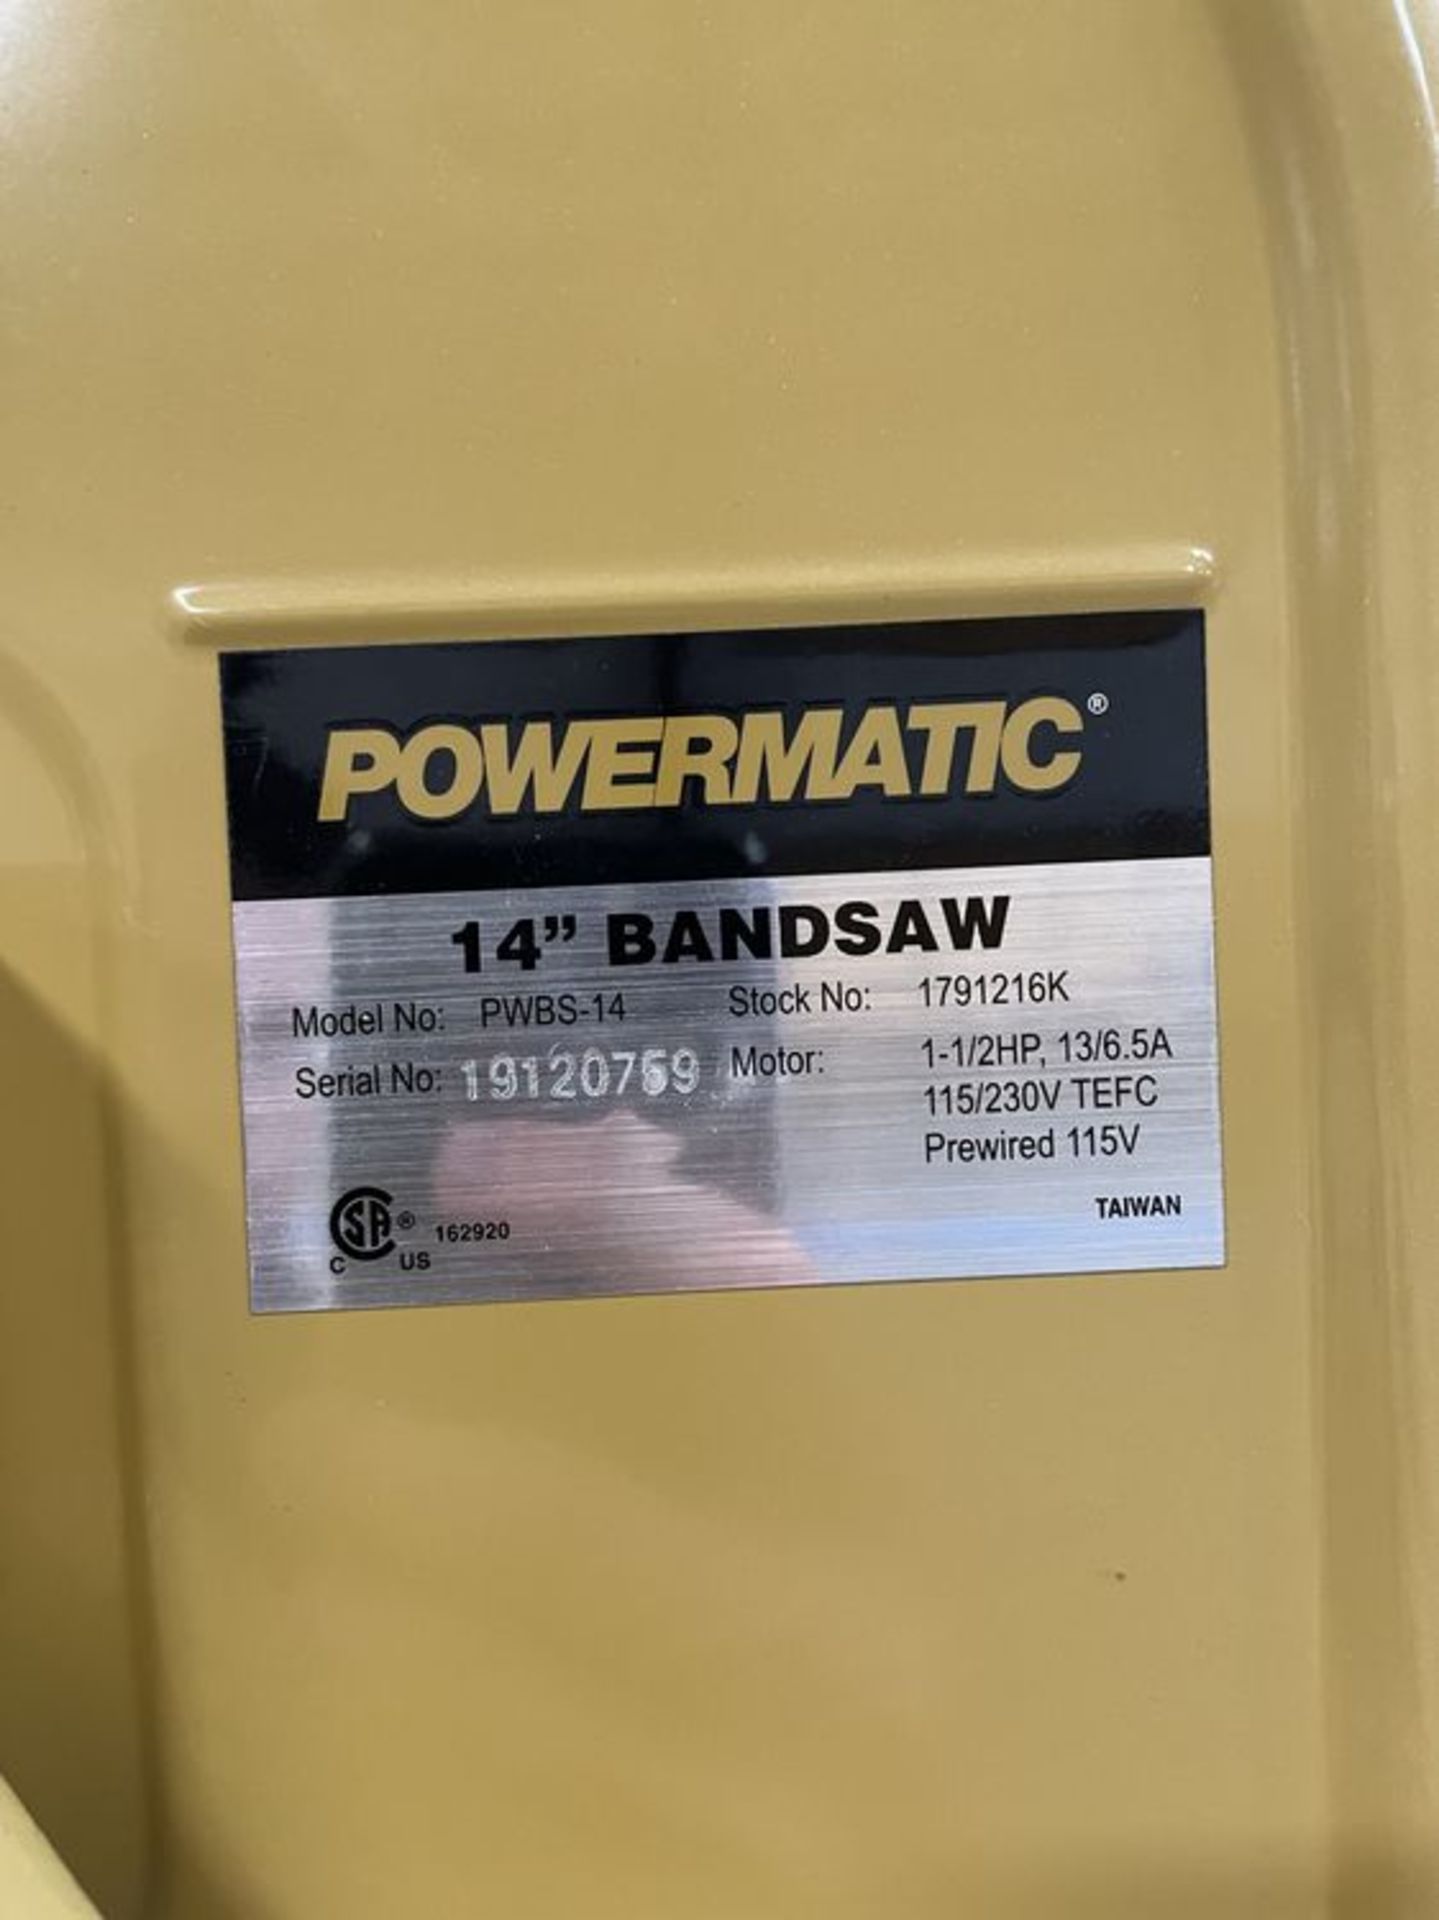 2019 Powermatic PWBS-14 14" Vertical Bandsaw. SN 19120769, Year 2019. Equipped with 1.5 HP motor, - Image 7 of 7